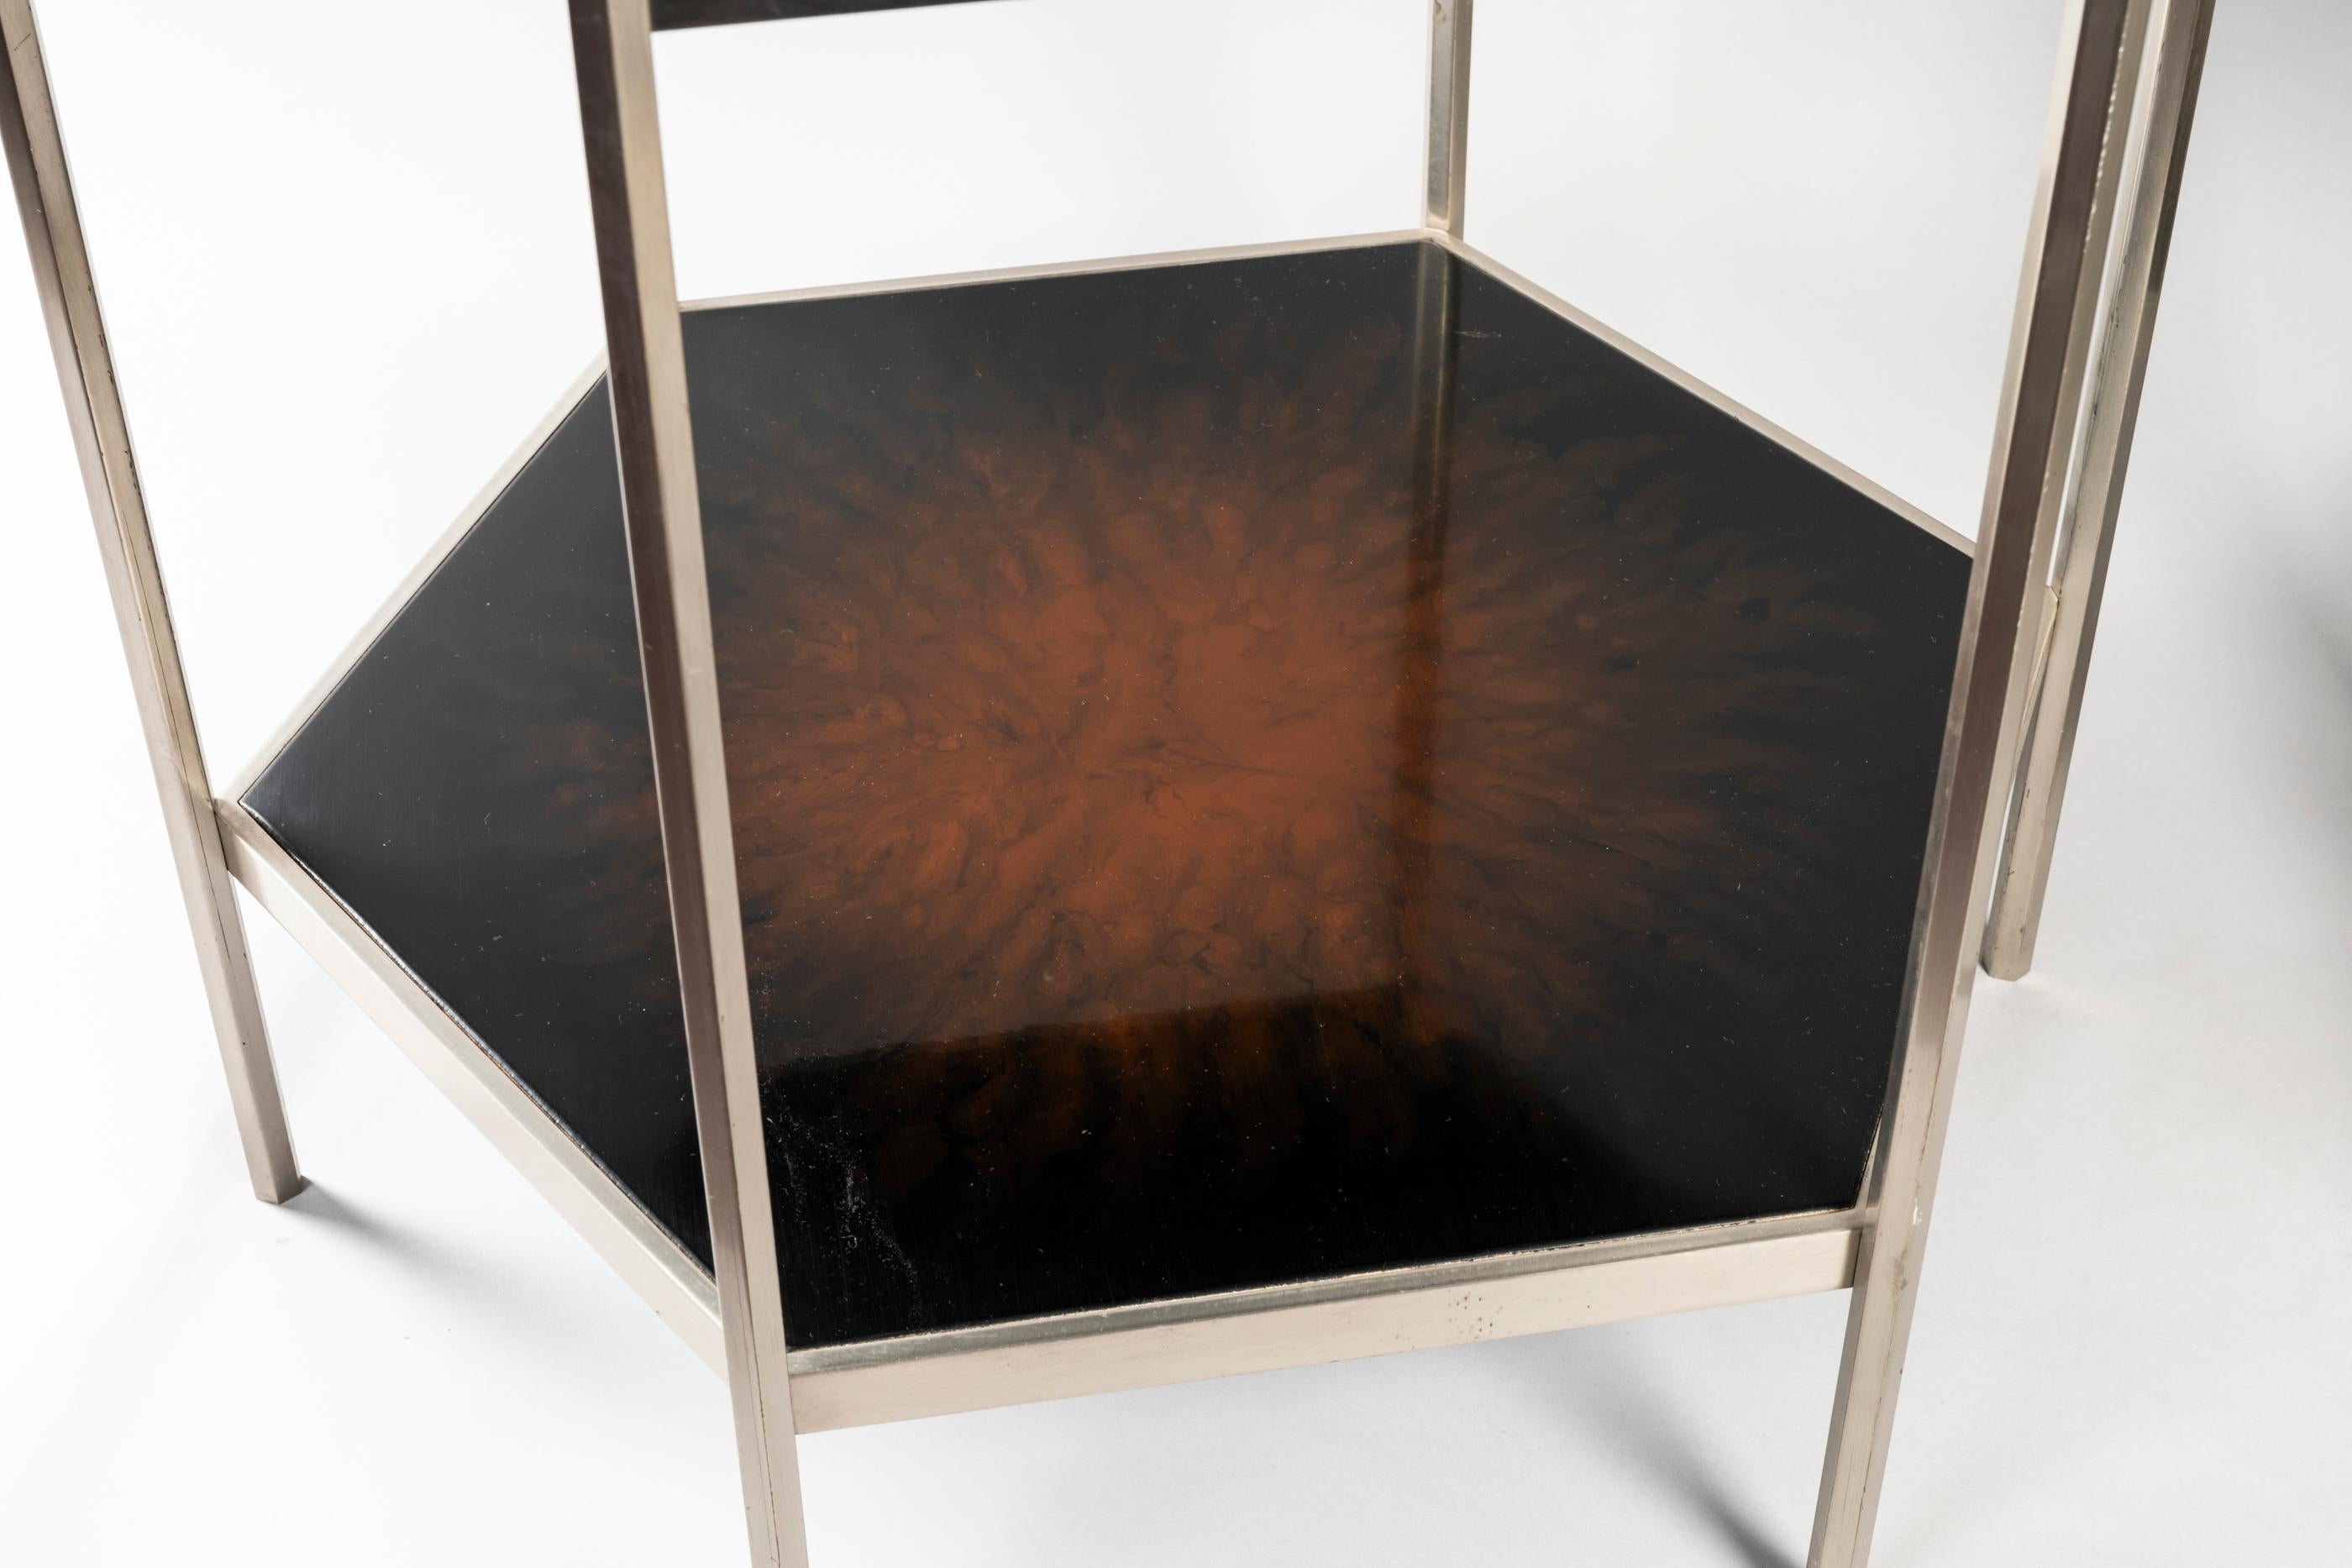 Chic modern black lacquered coffee table (touch of red: flamed) designed by Jacques Charles in the 1970s for prestigious Maison Charles in Paris. All structure is made in brushed steel.